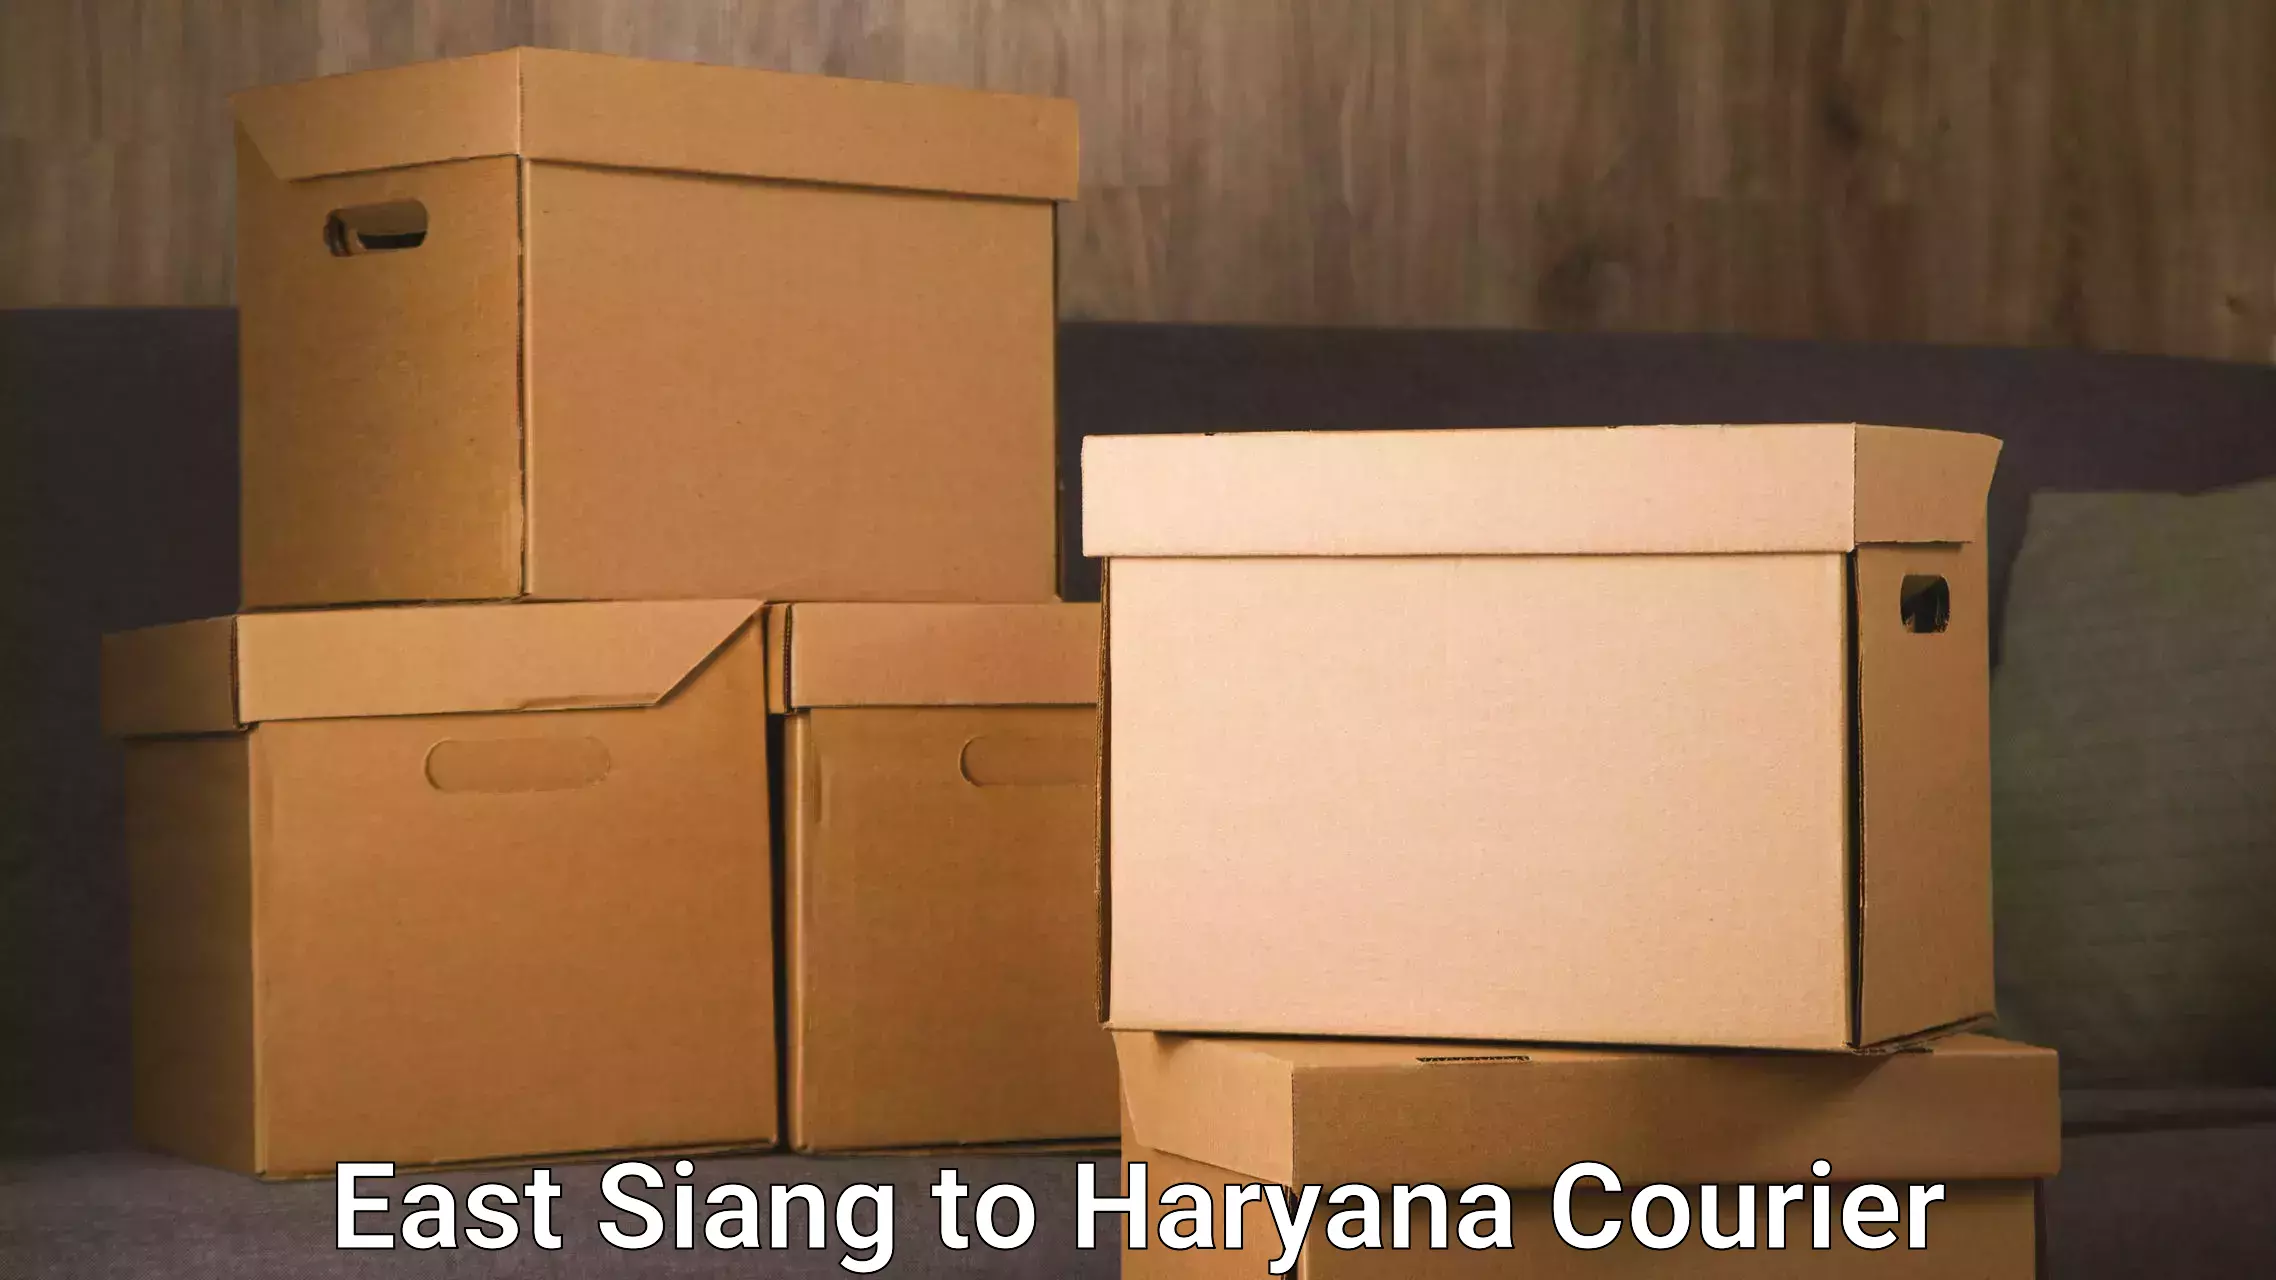 Advanced shipping network East Siang to Gurgaon